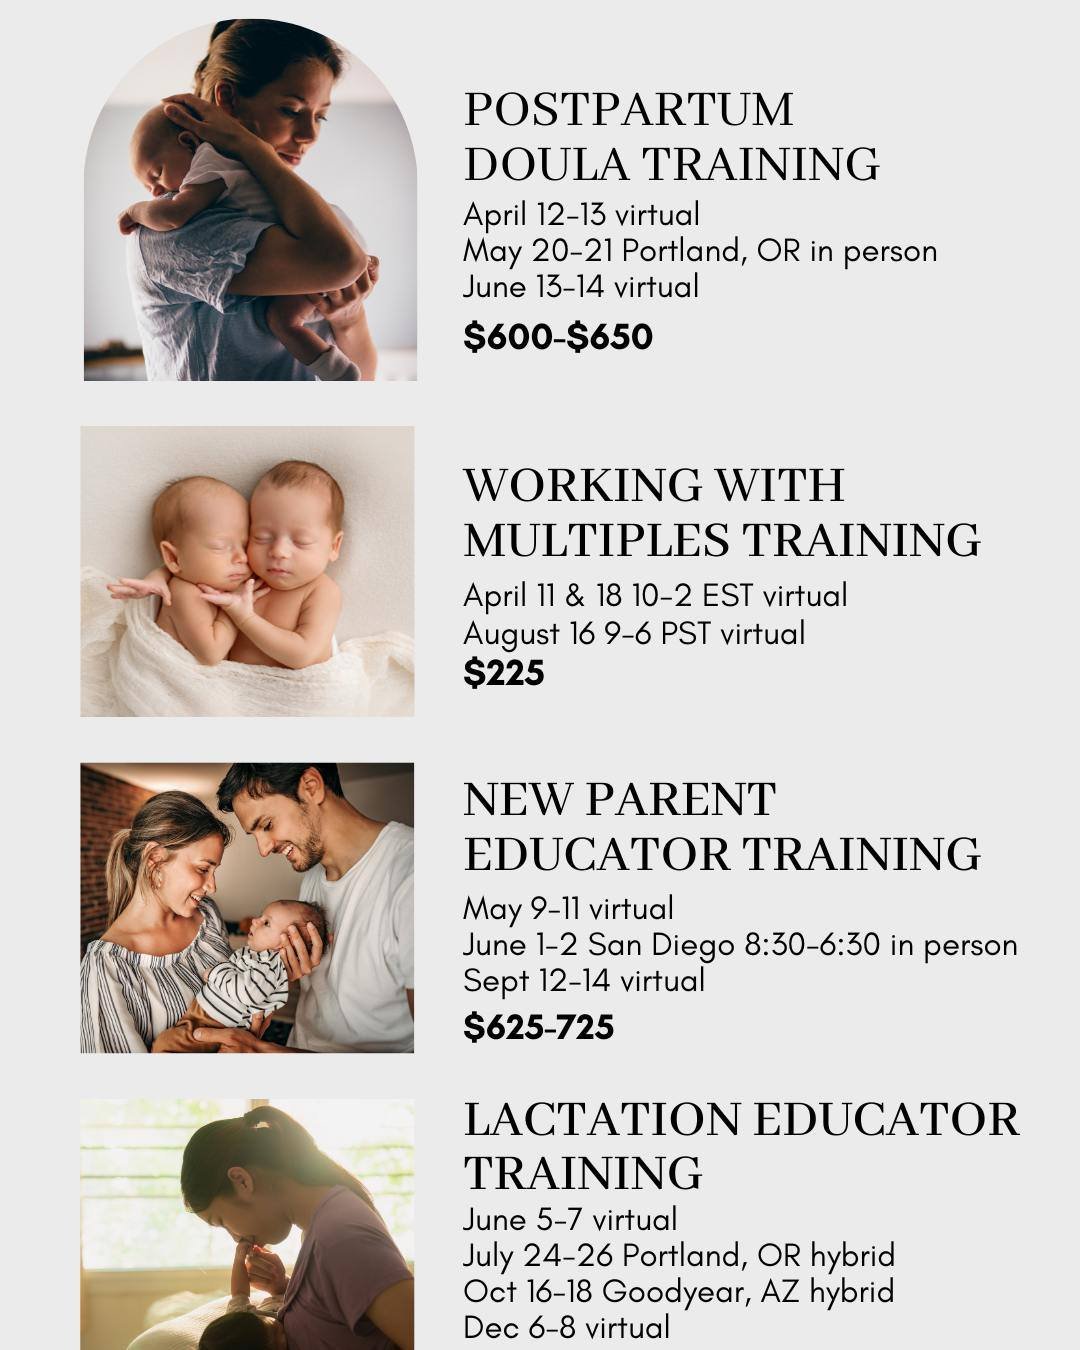 Can't wait to meet all the new professional friends and colleagues at these upcoming trainings. Which one fits for you?
Here's a link to learn more: https://www.abcdoula.com/professional-page